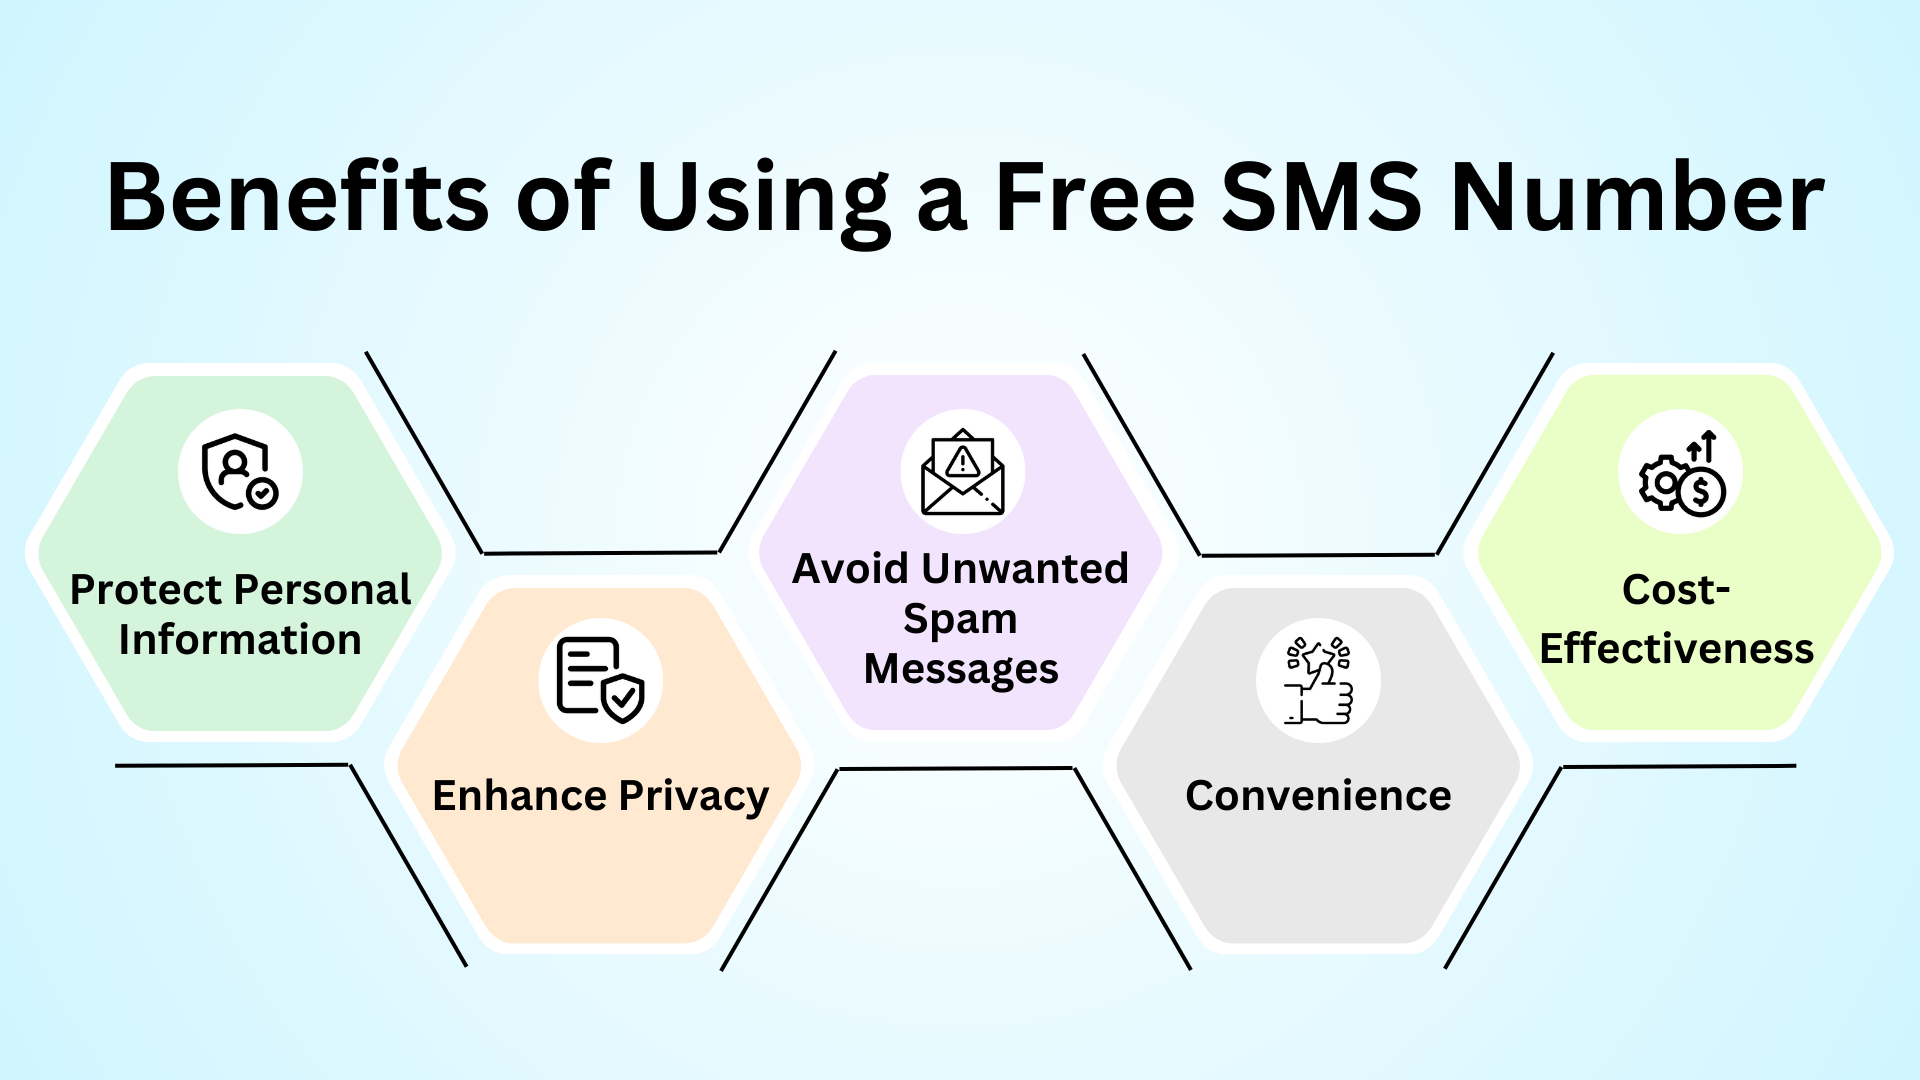 Benefits of Using a Free SMS Number